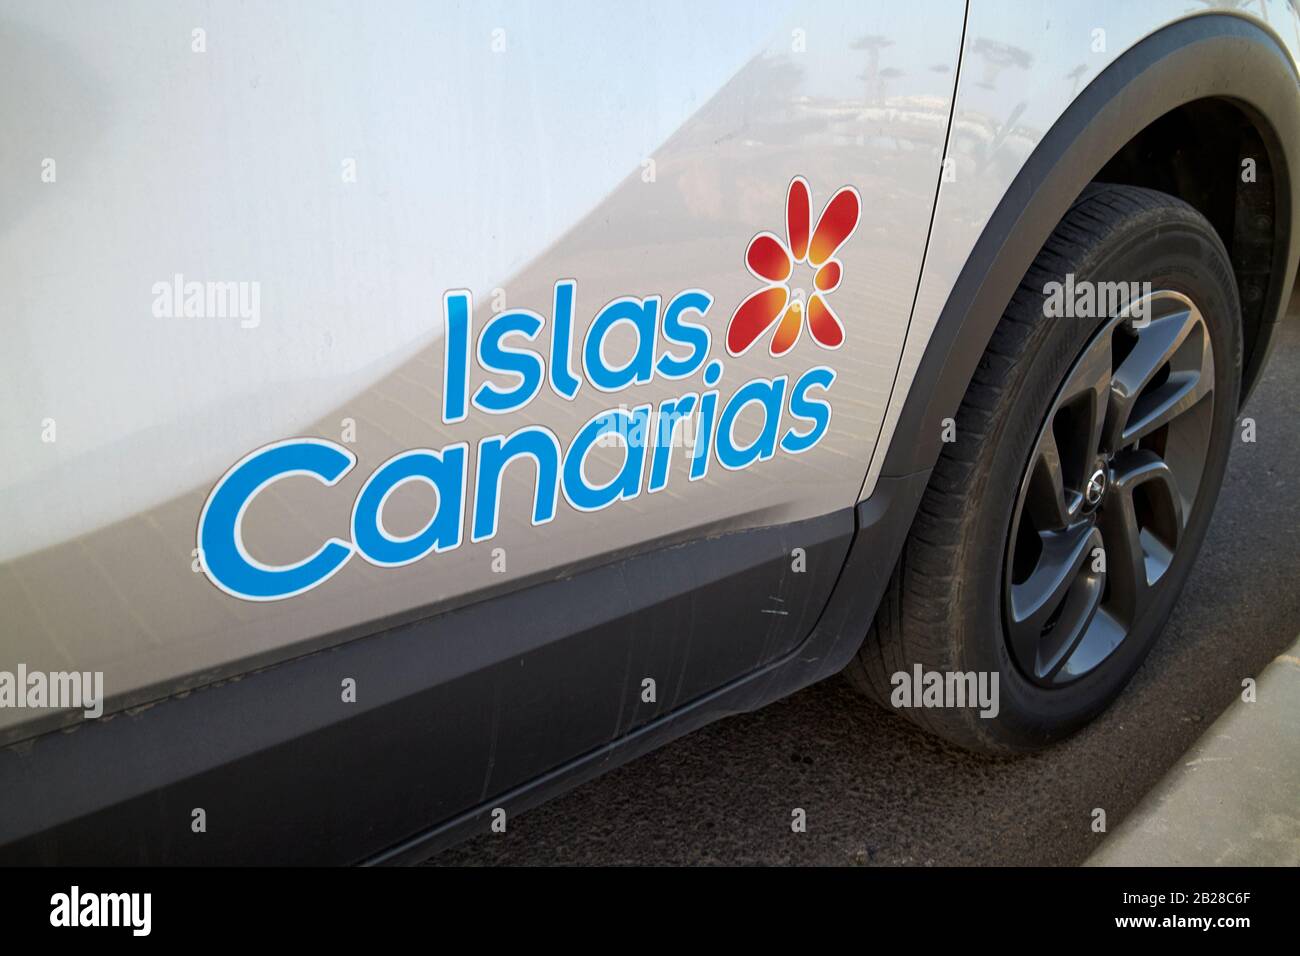 islas canarias logo on the side of a hire car in Lanzarote canary islands spain Stock Photo